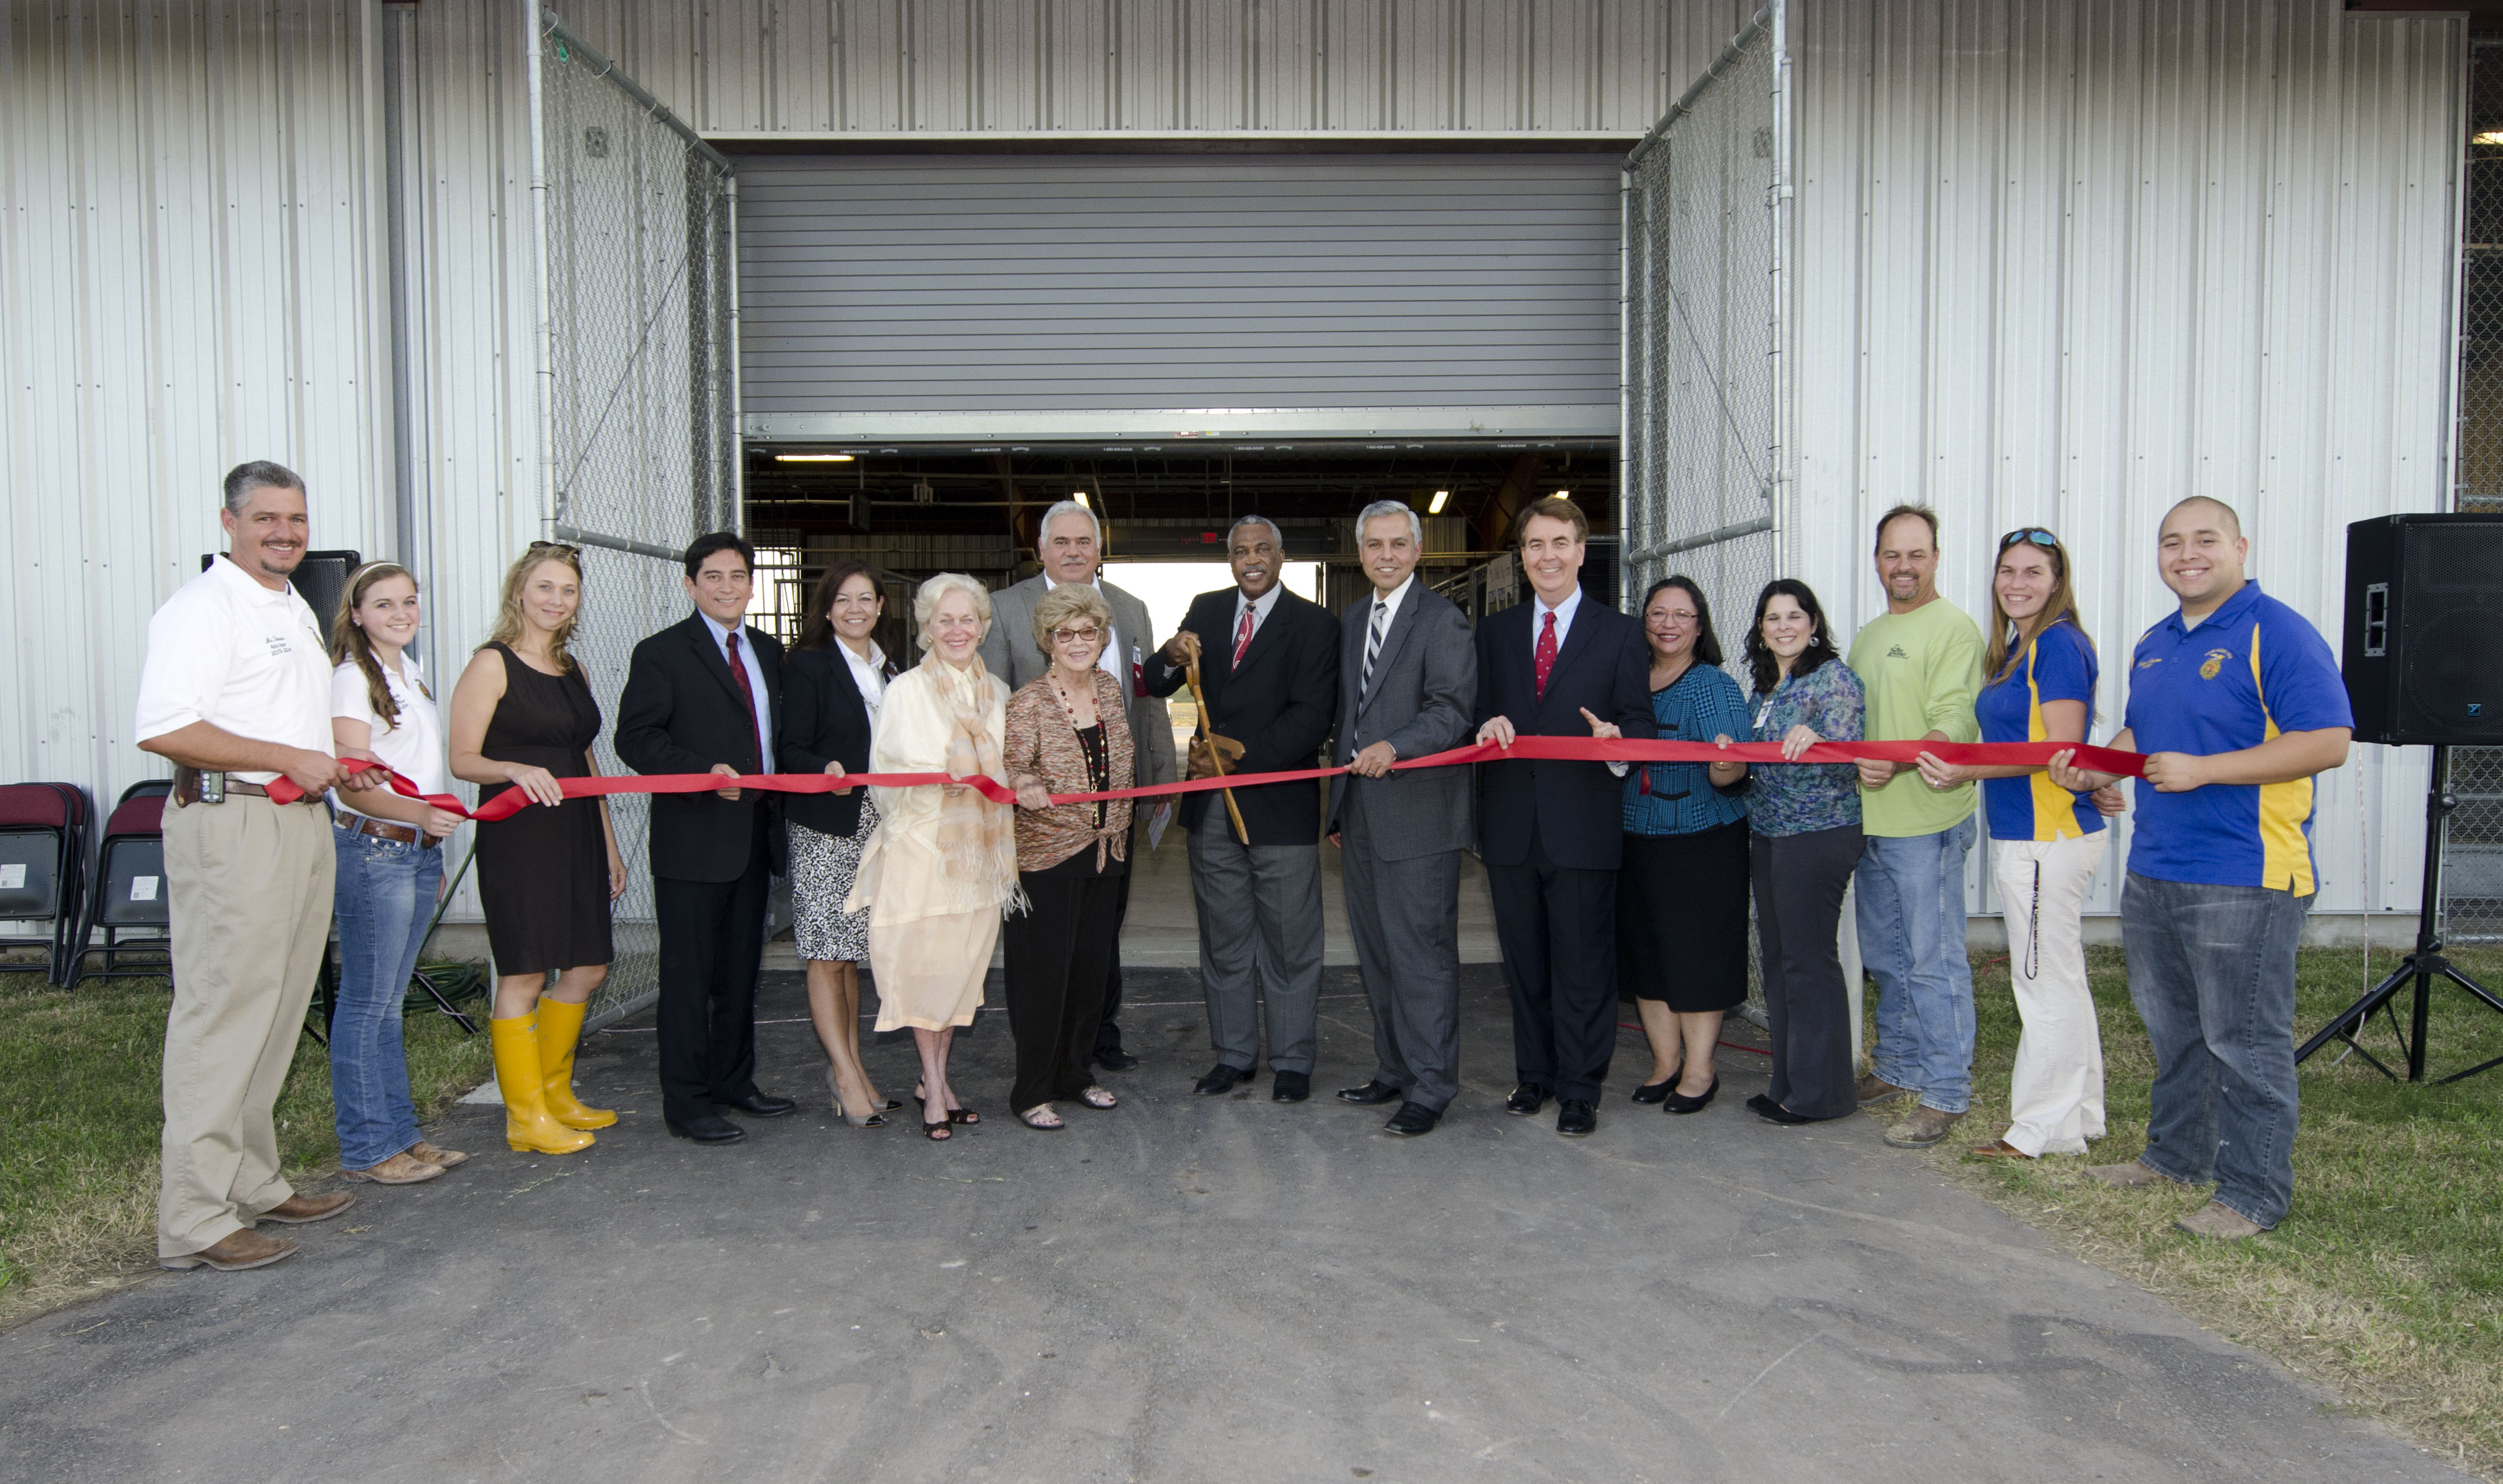 Agricultural Project Center marks monumental opening with Ribbon Cutting Ceremony